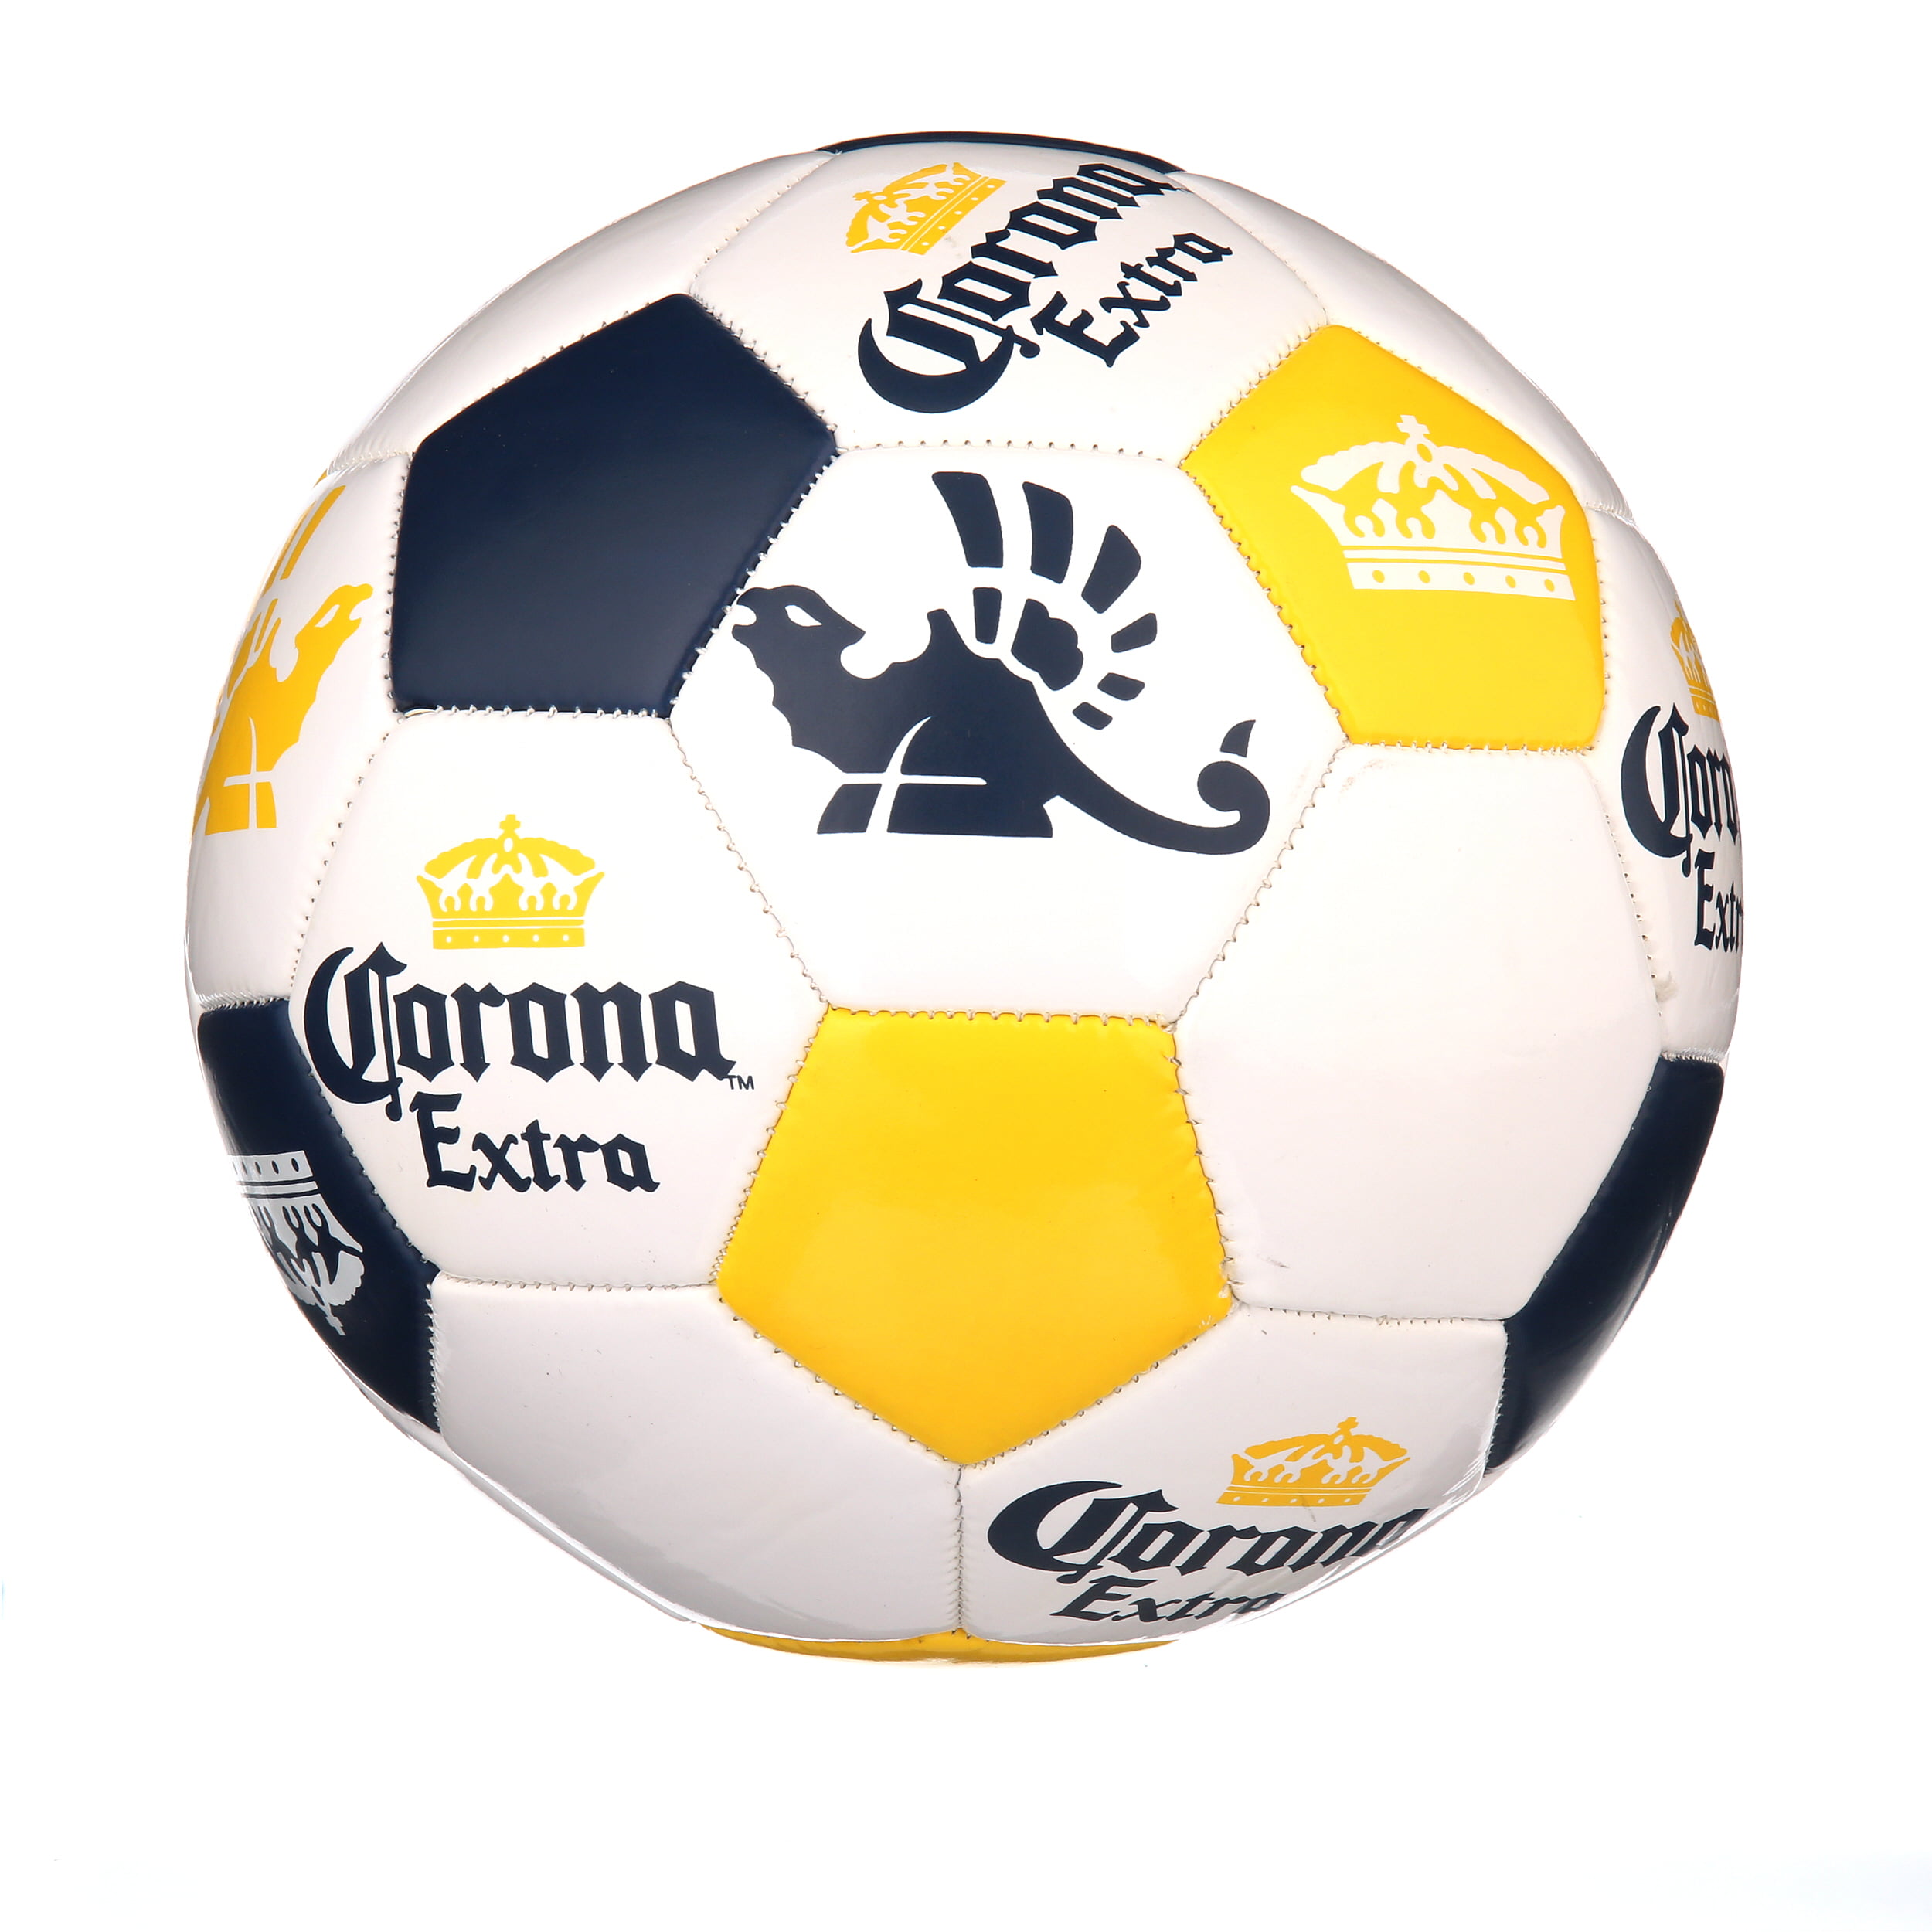 Corona Extra Futbol Soccer Ball Beach Party Official Taille Sous Licence-New & F/S 